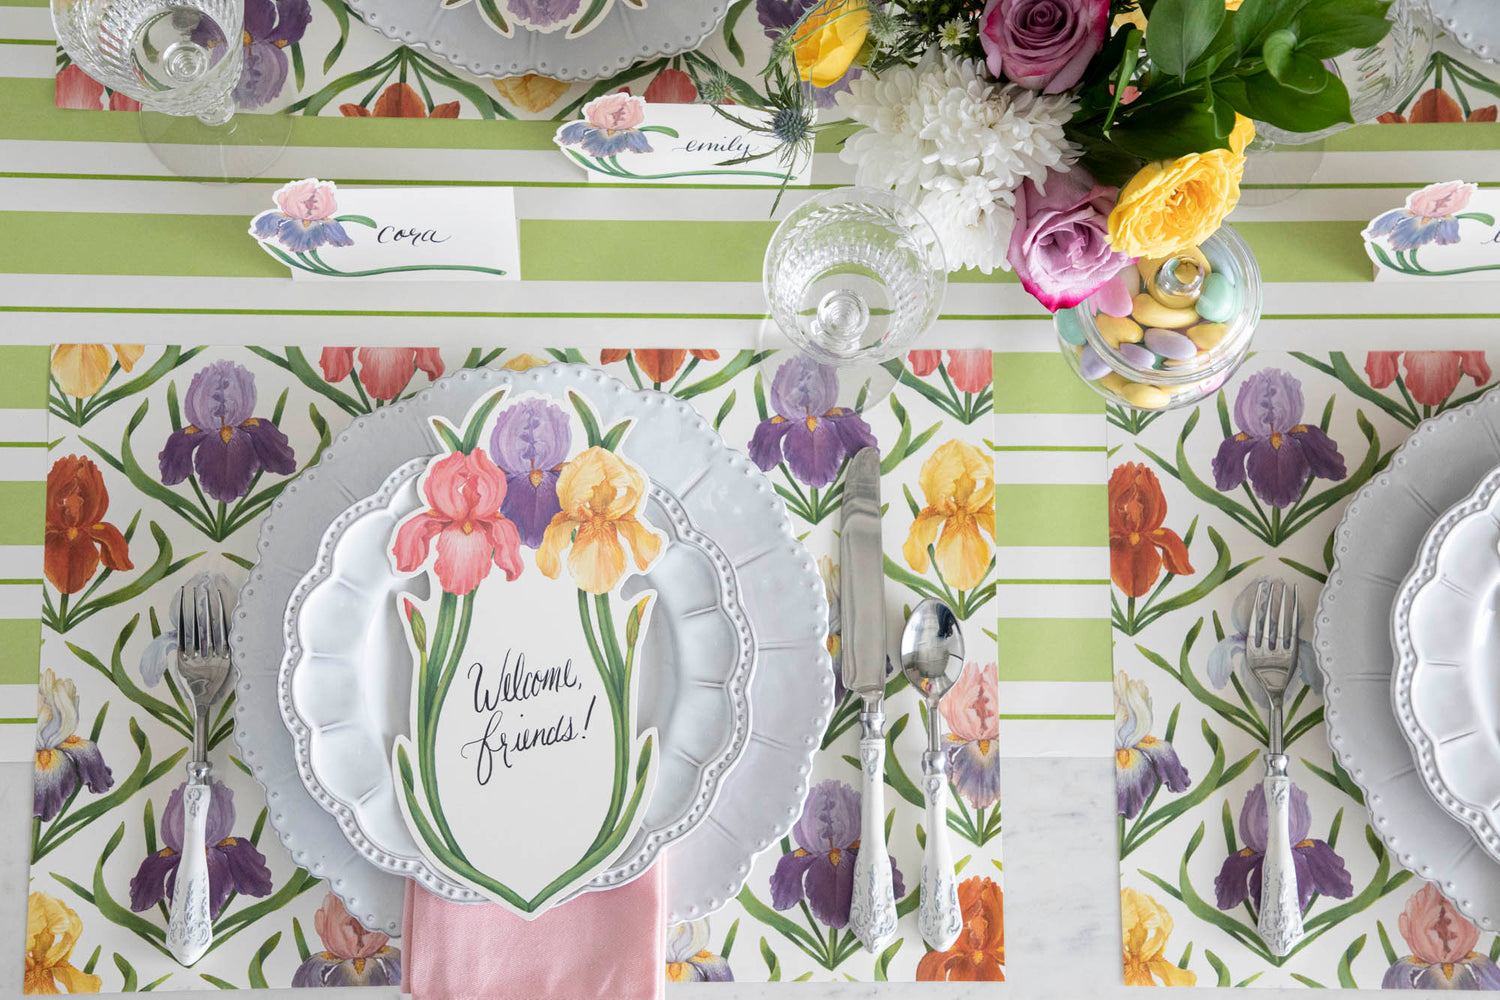 A Hester &amp; Cook Iris Table Card with flowers and plates.